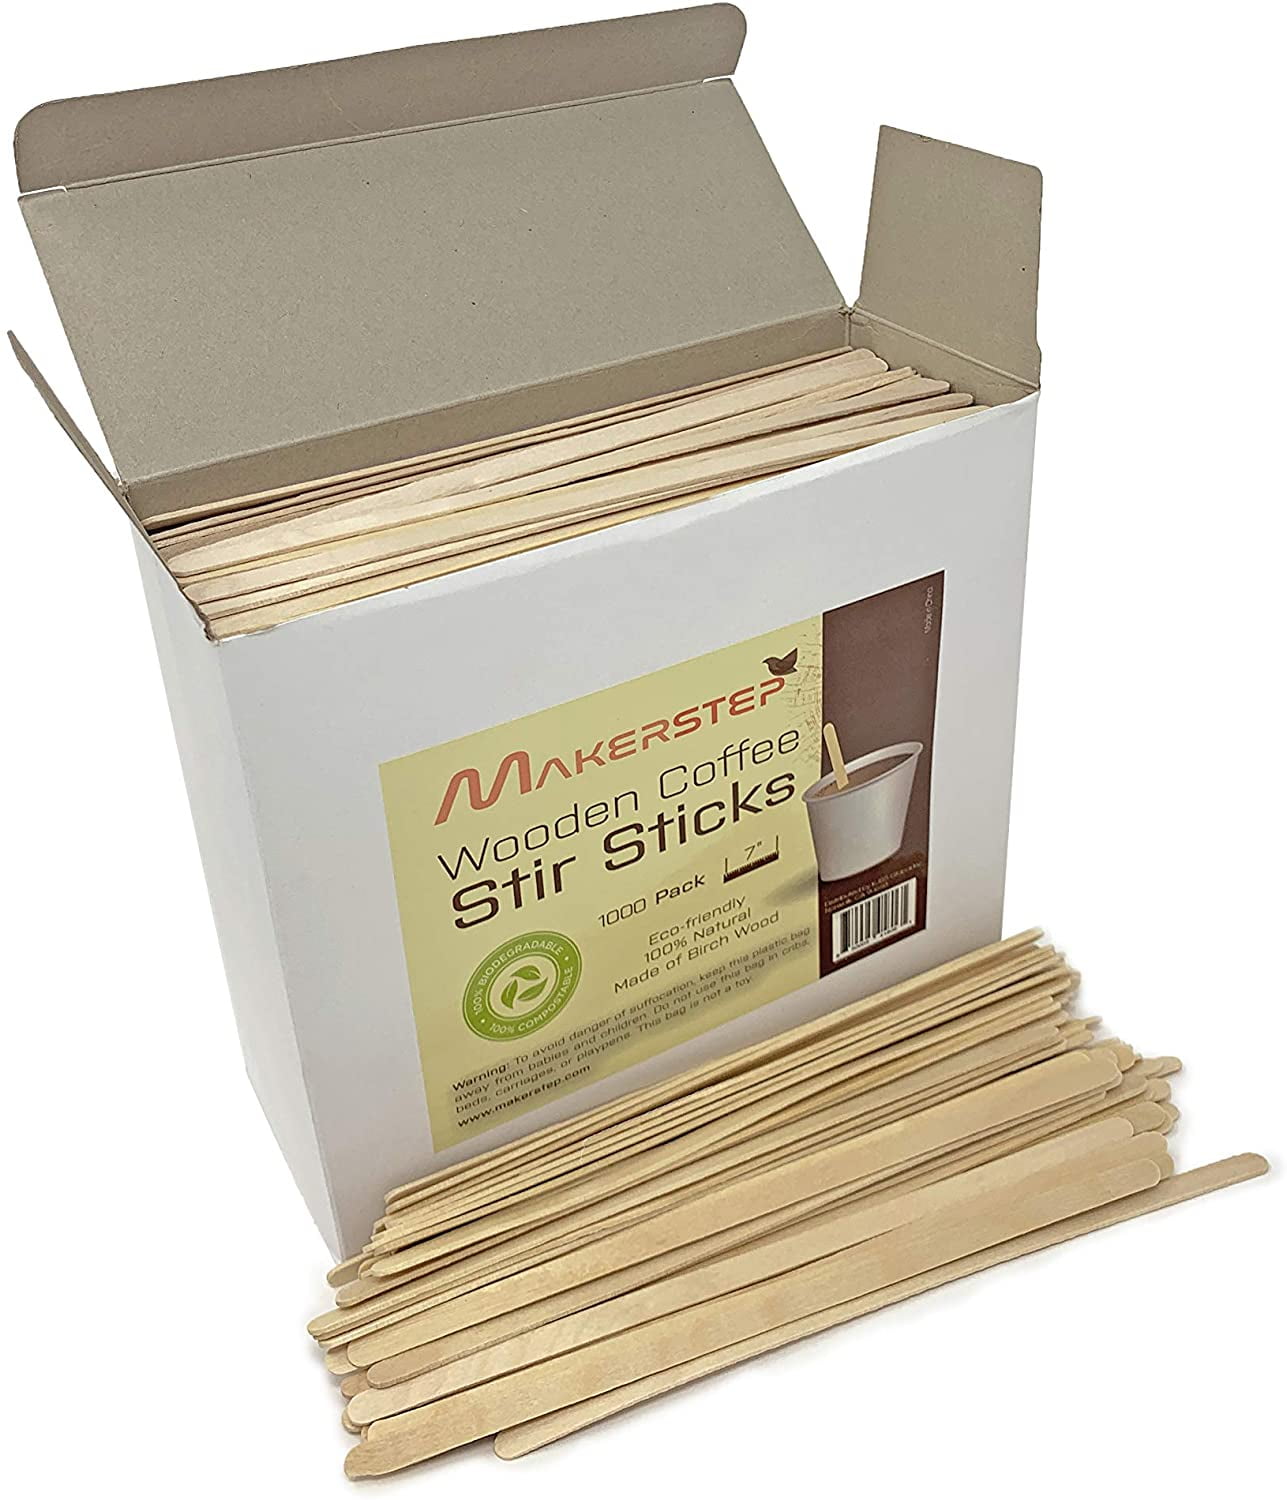 WOODEN COFFEE STIRRERS 7 INCH PK1000 